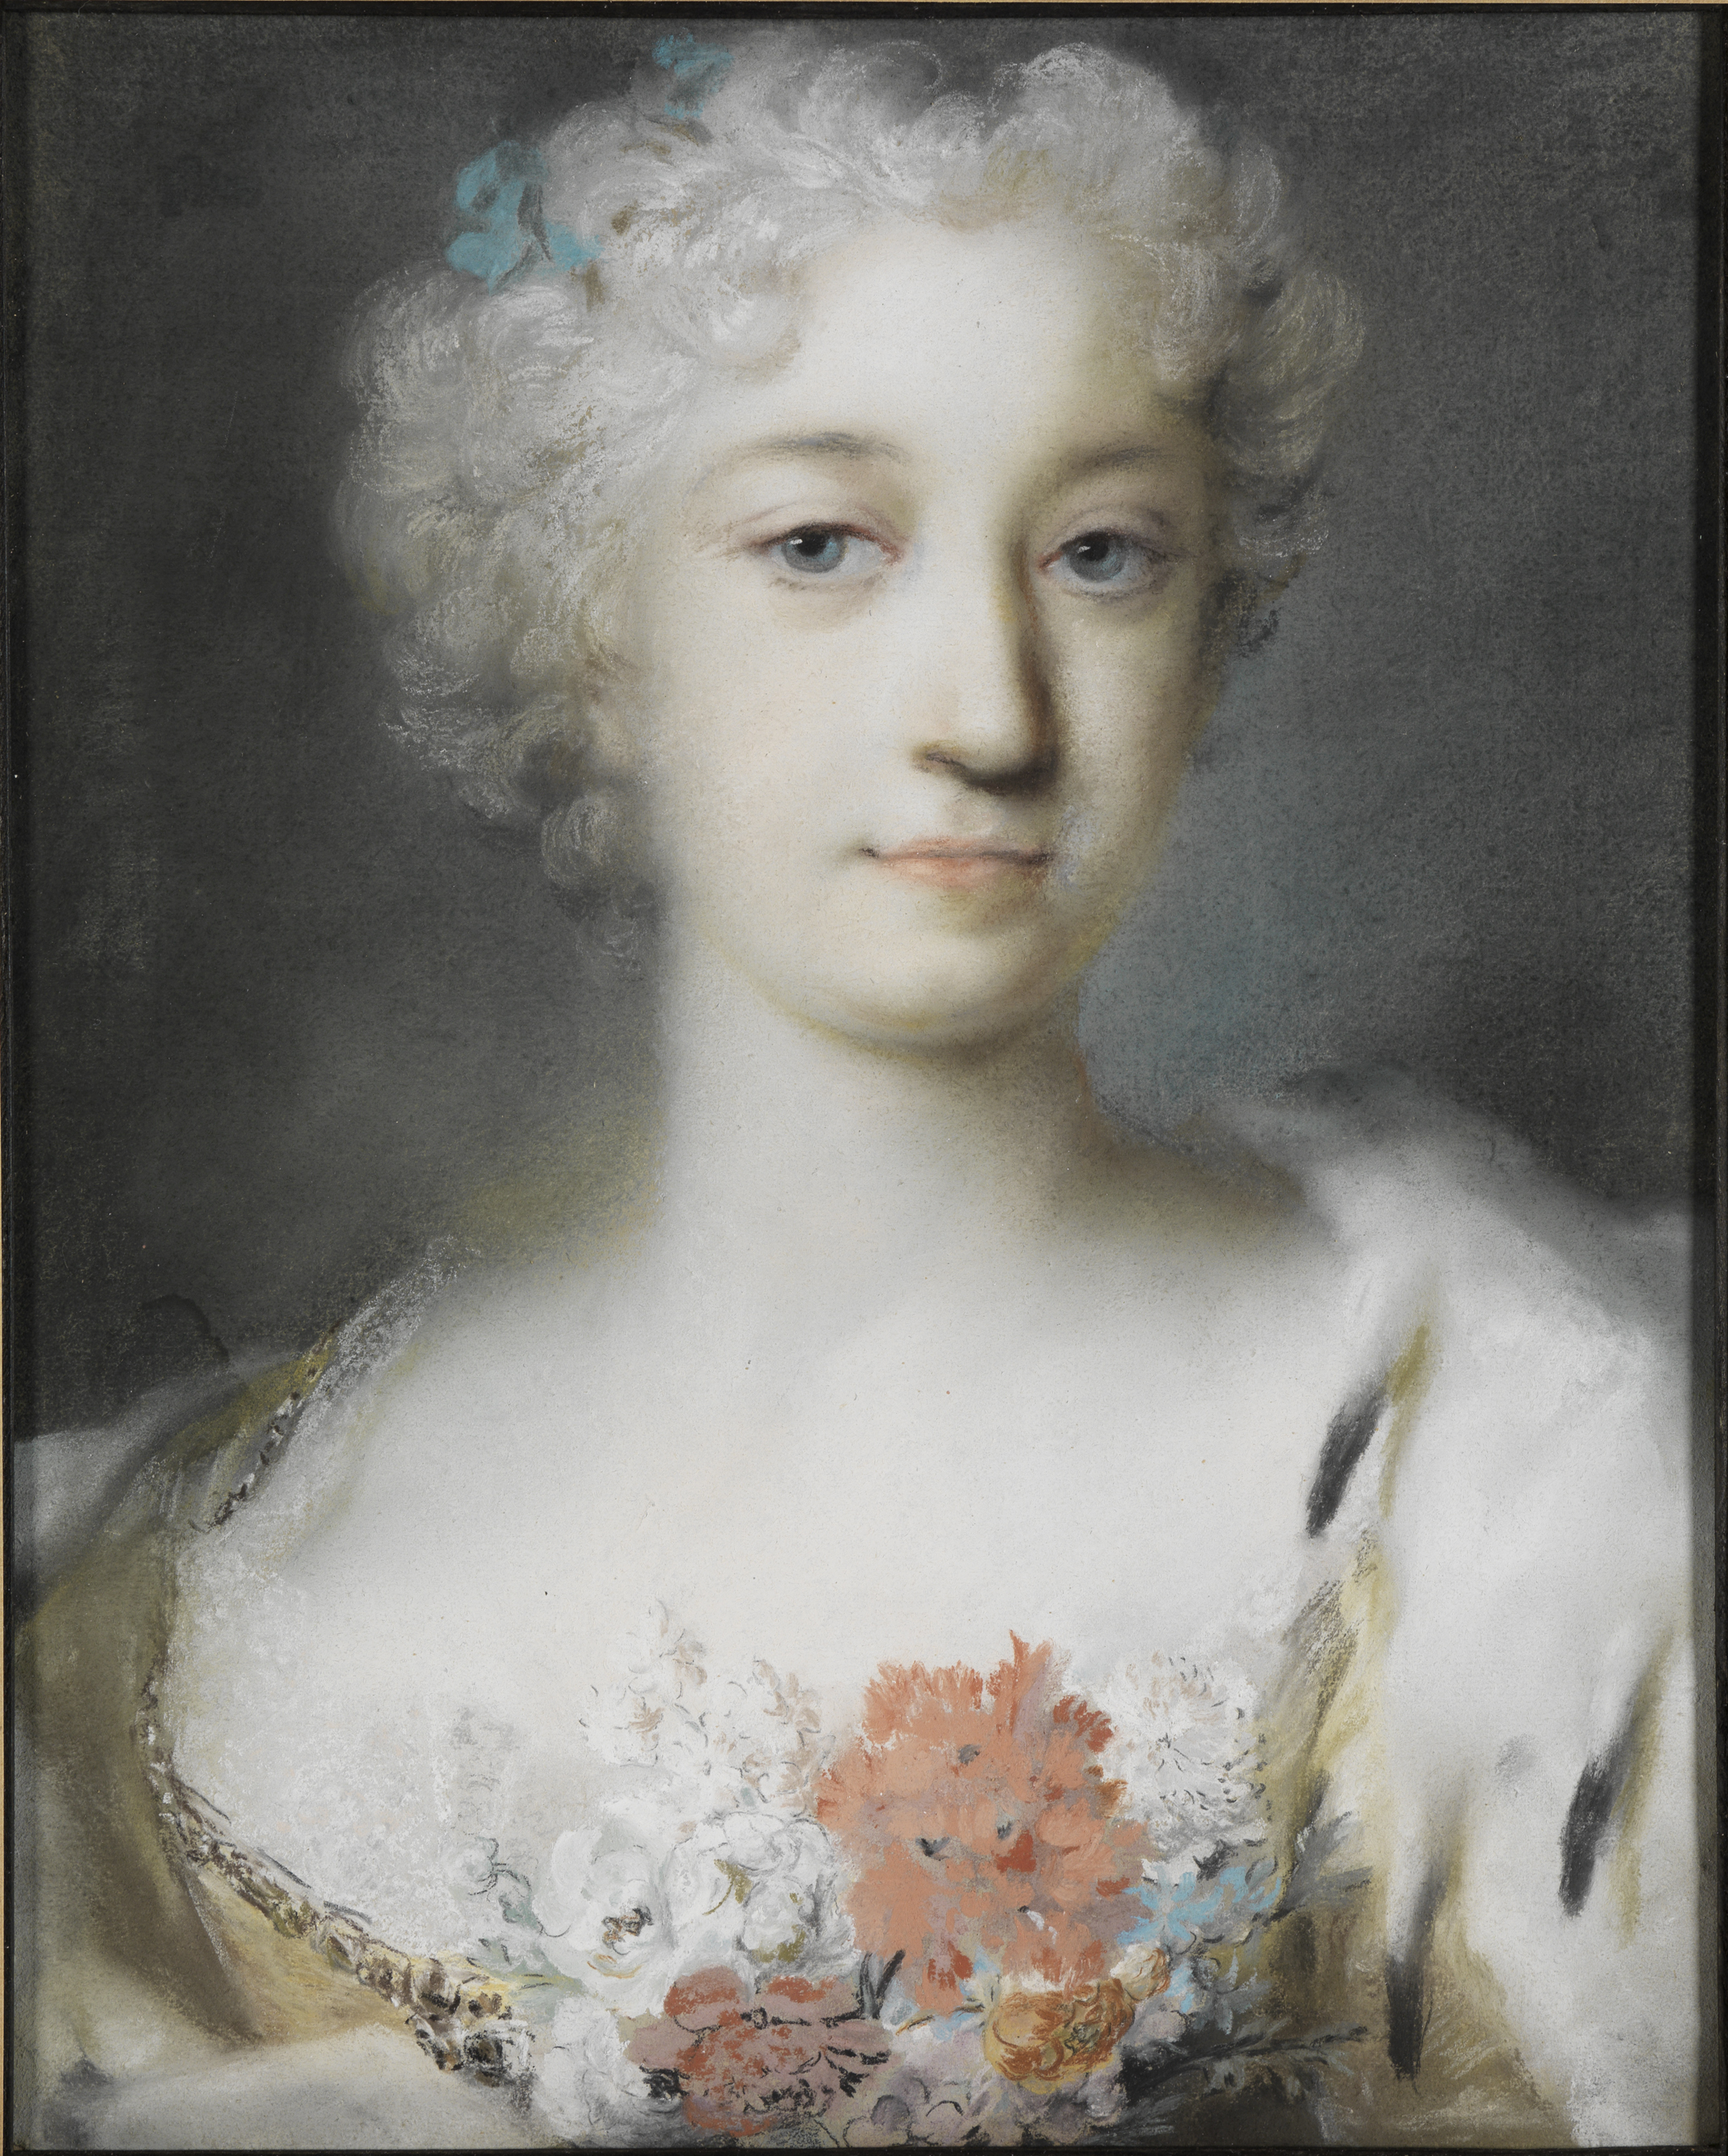 A bust-length portrait of a young woman wearing an eighteenth-century white wig with blue bows. She is elegantly dressed, with a spray of flowers at her bust. She looks directly out at the viewer. 